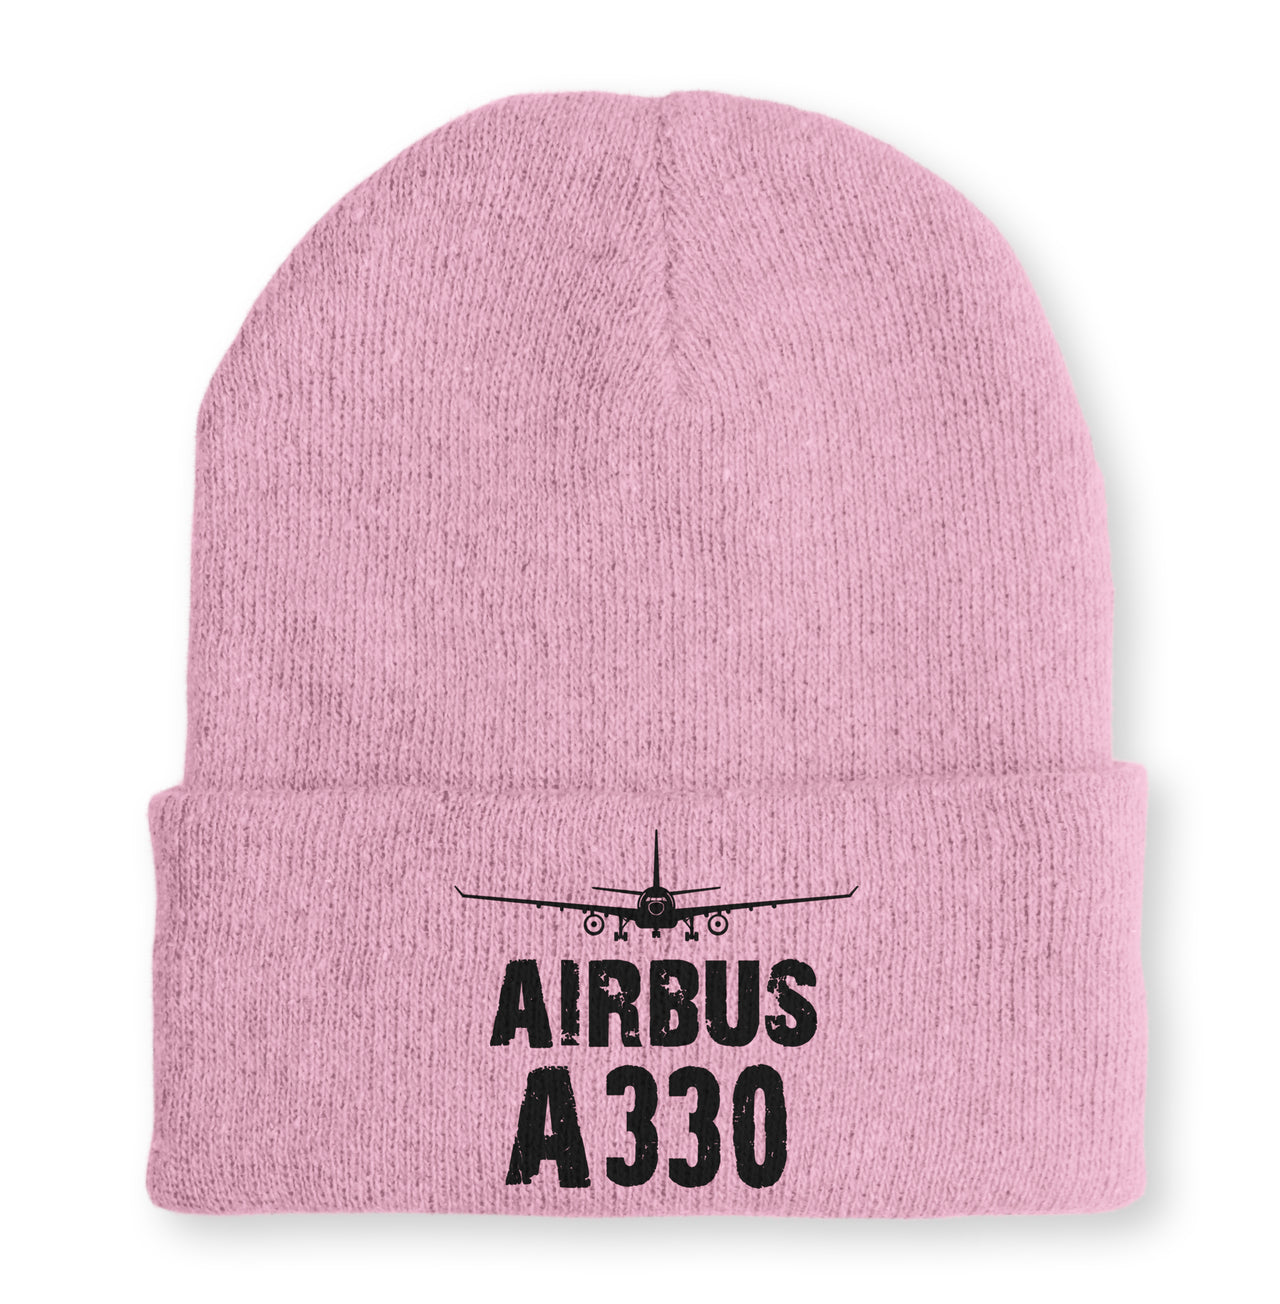 Airbus A330 & Plane Embroidered Beanies